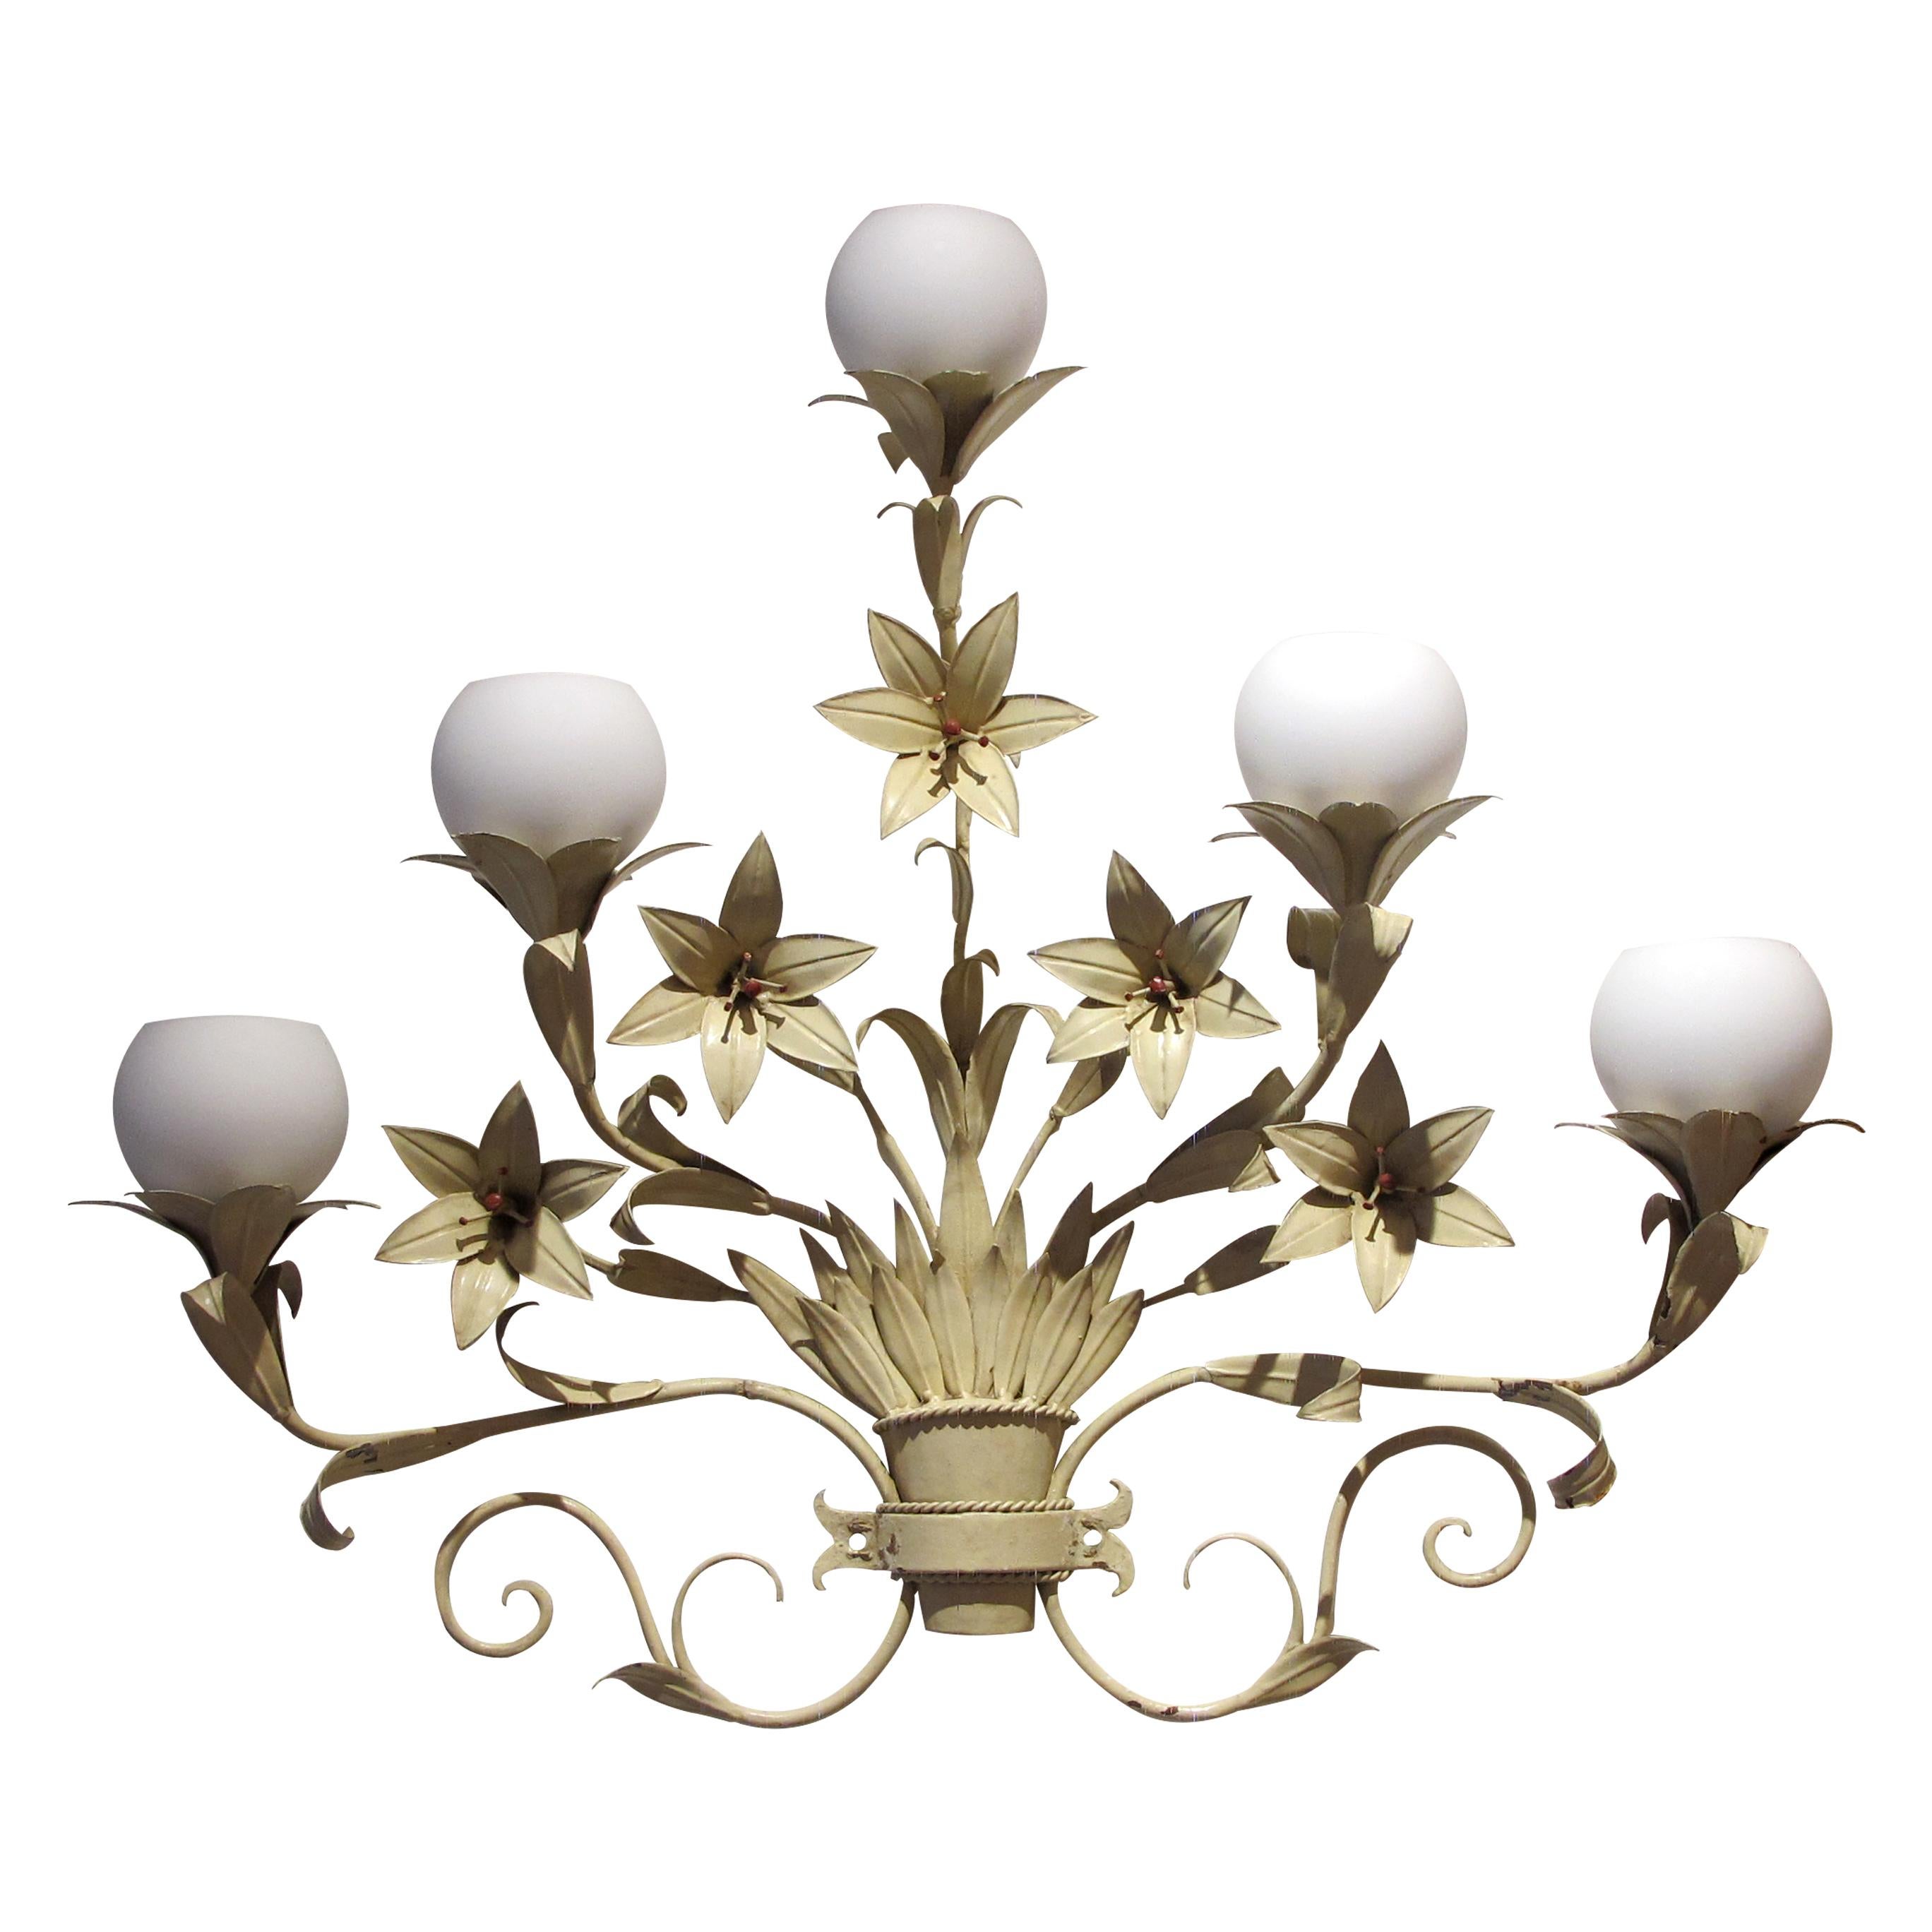 A highly decorative organic mid-century large pair of toleware French lilies wall lights. Each wall light is decorated with life-like foliage, scrolled metalwork and lily flowers. Each wall light holds 5 individual branches with 5 opaque round glass